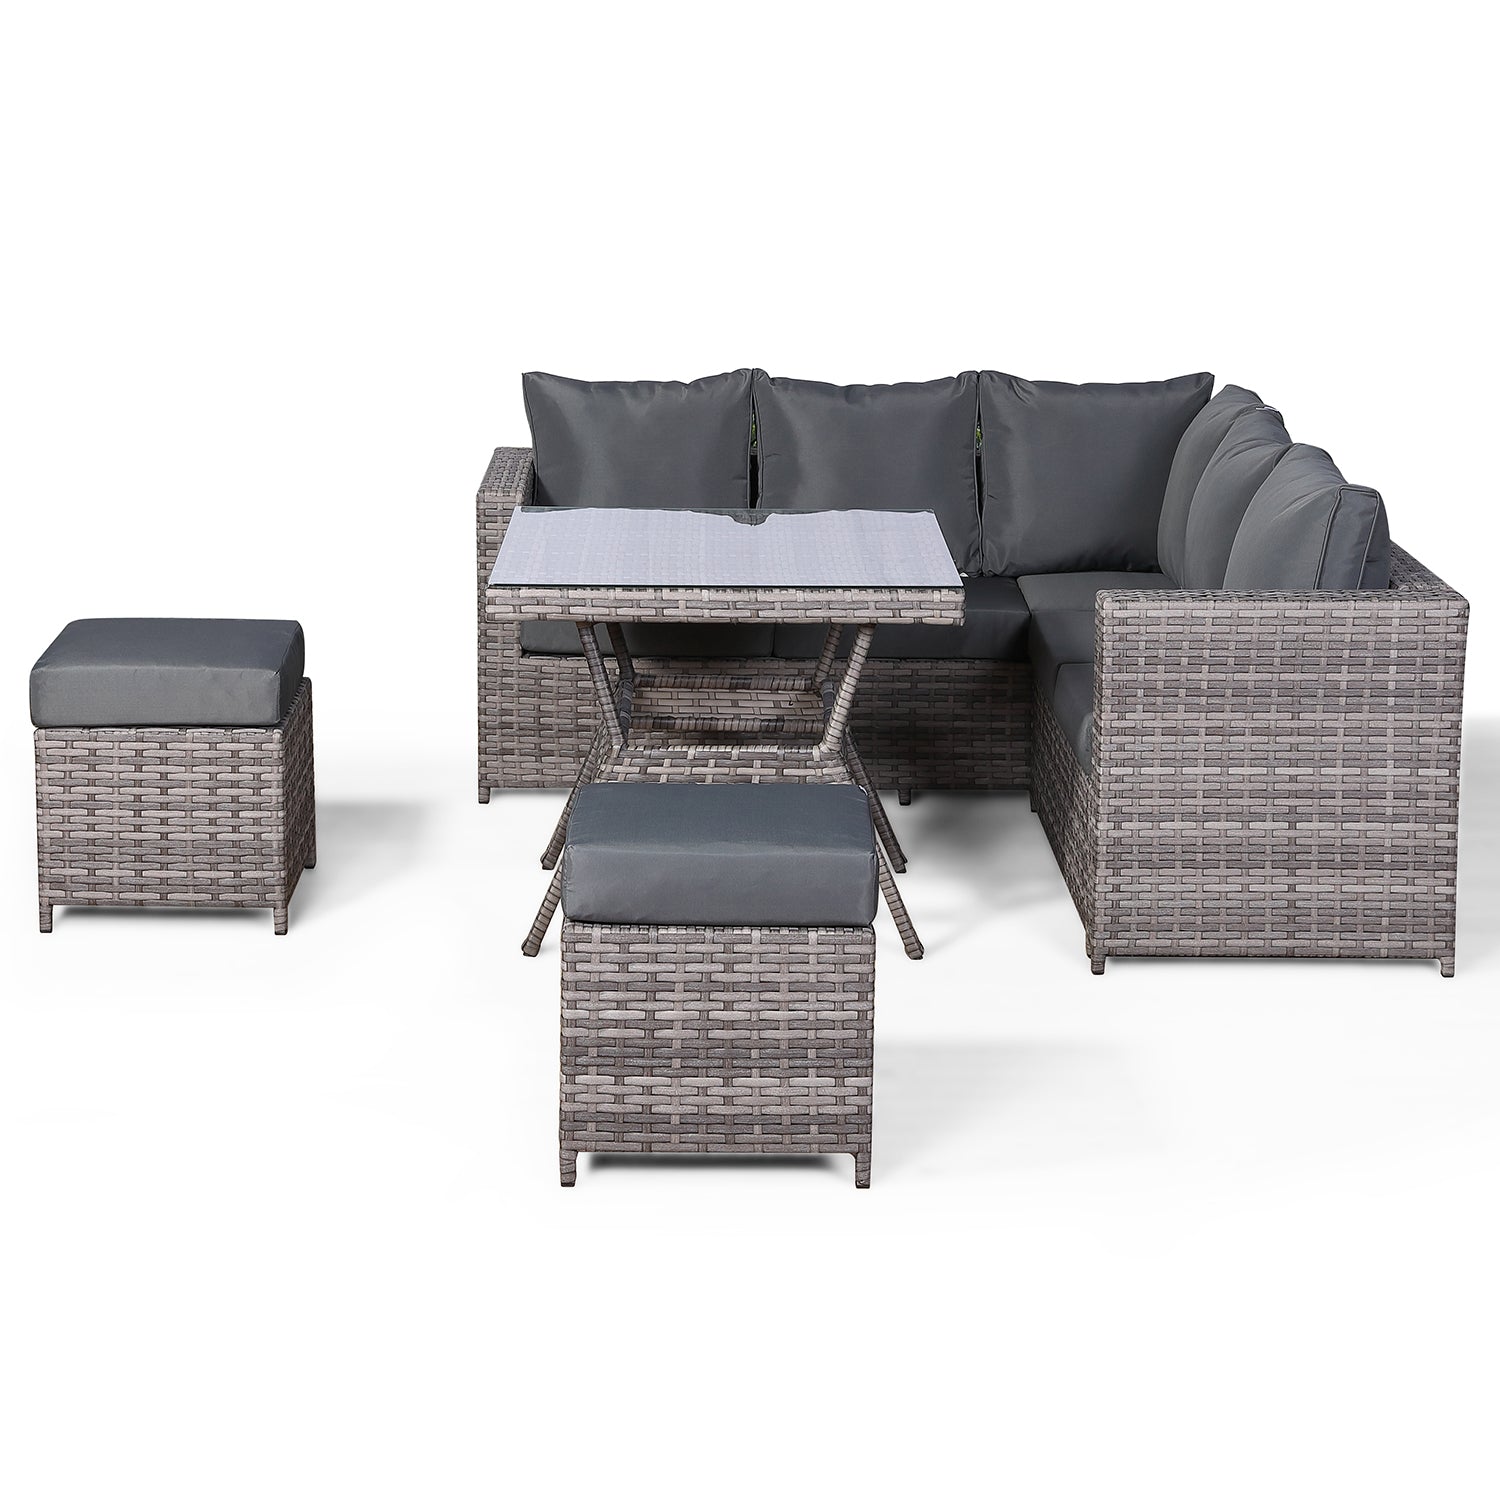 Modern Range Lille Corner Sofa with Dining Table in Grey Weave and Cushions